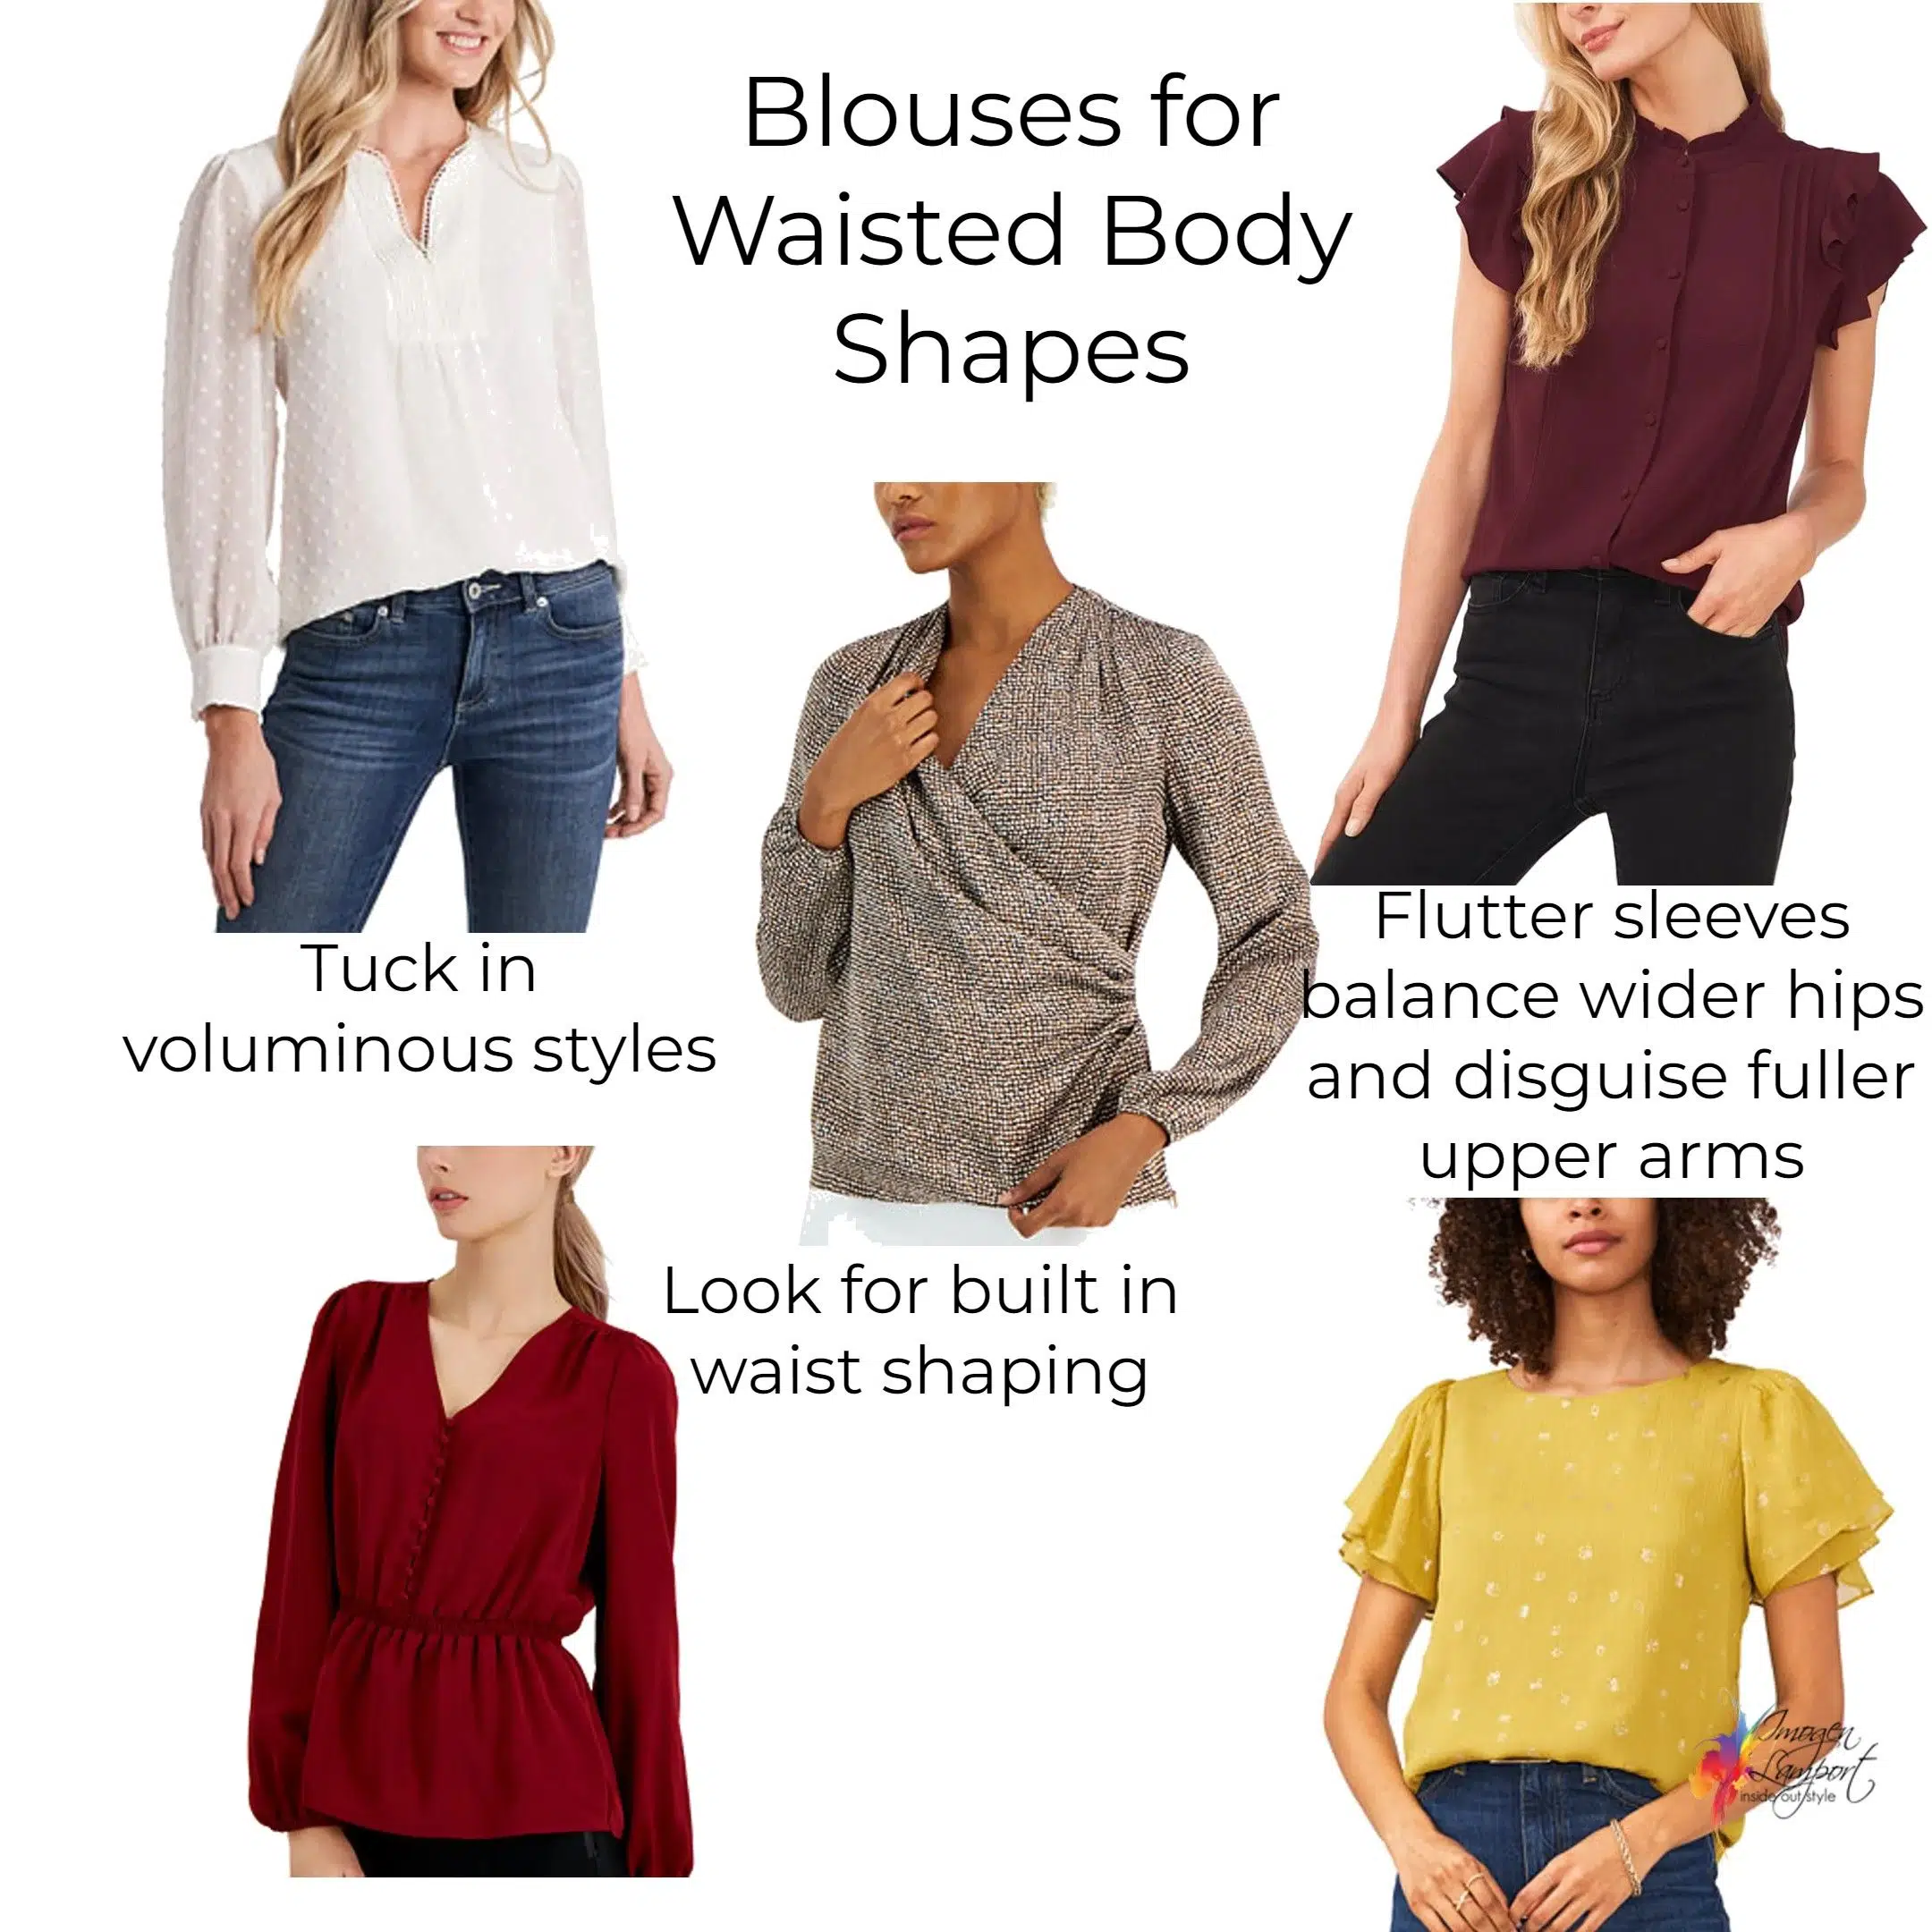 Blouses for your waisted body shape - hourglass, pear